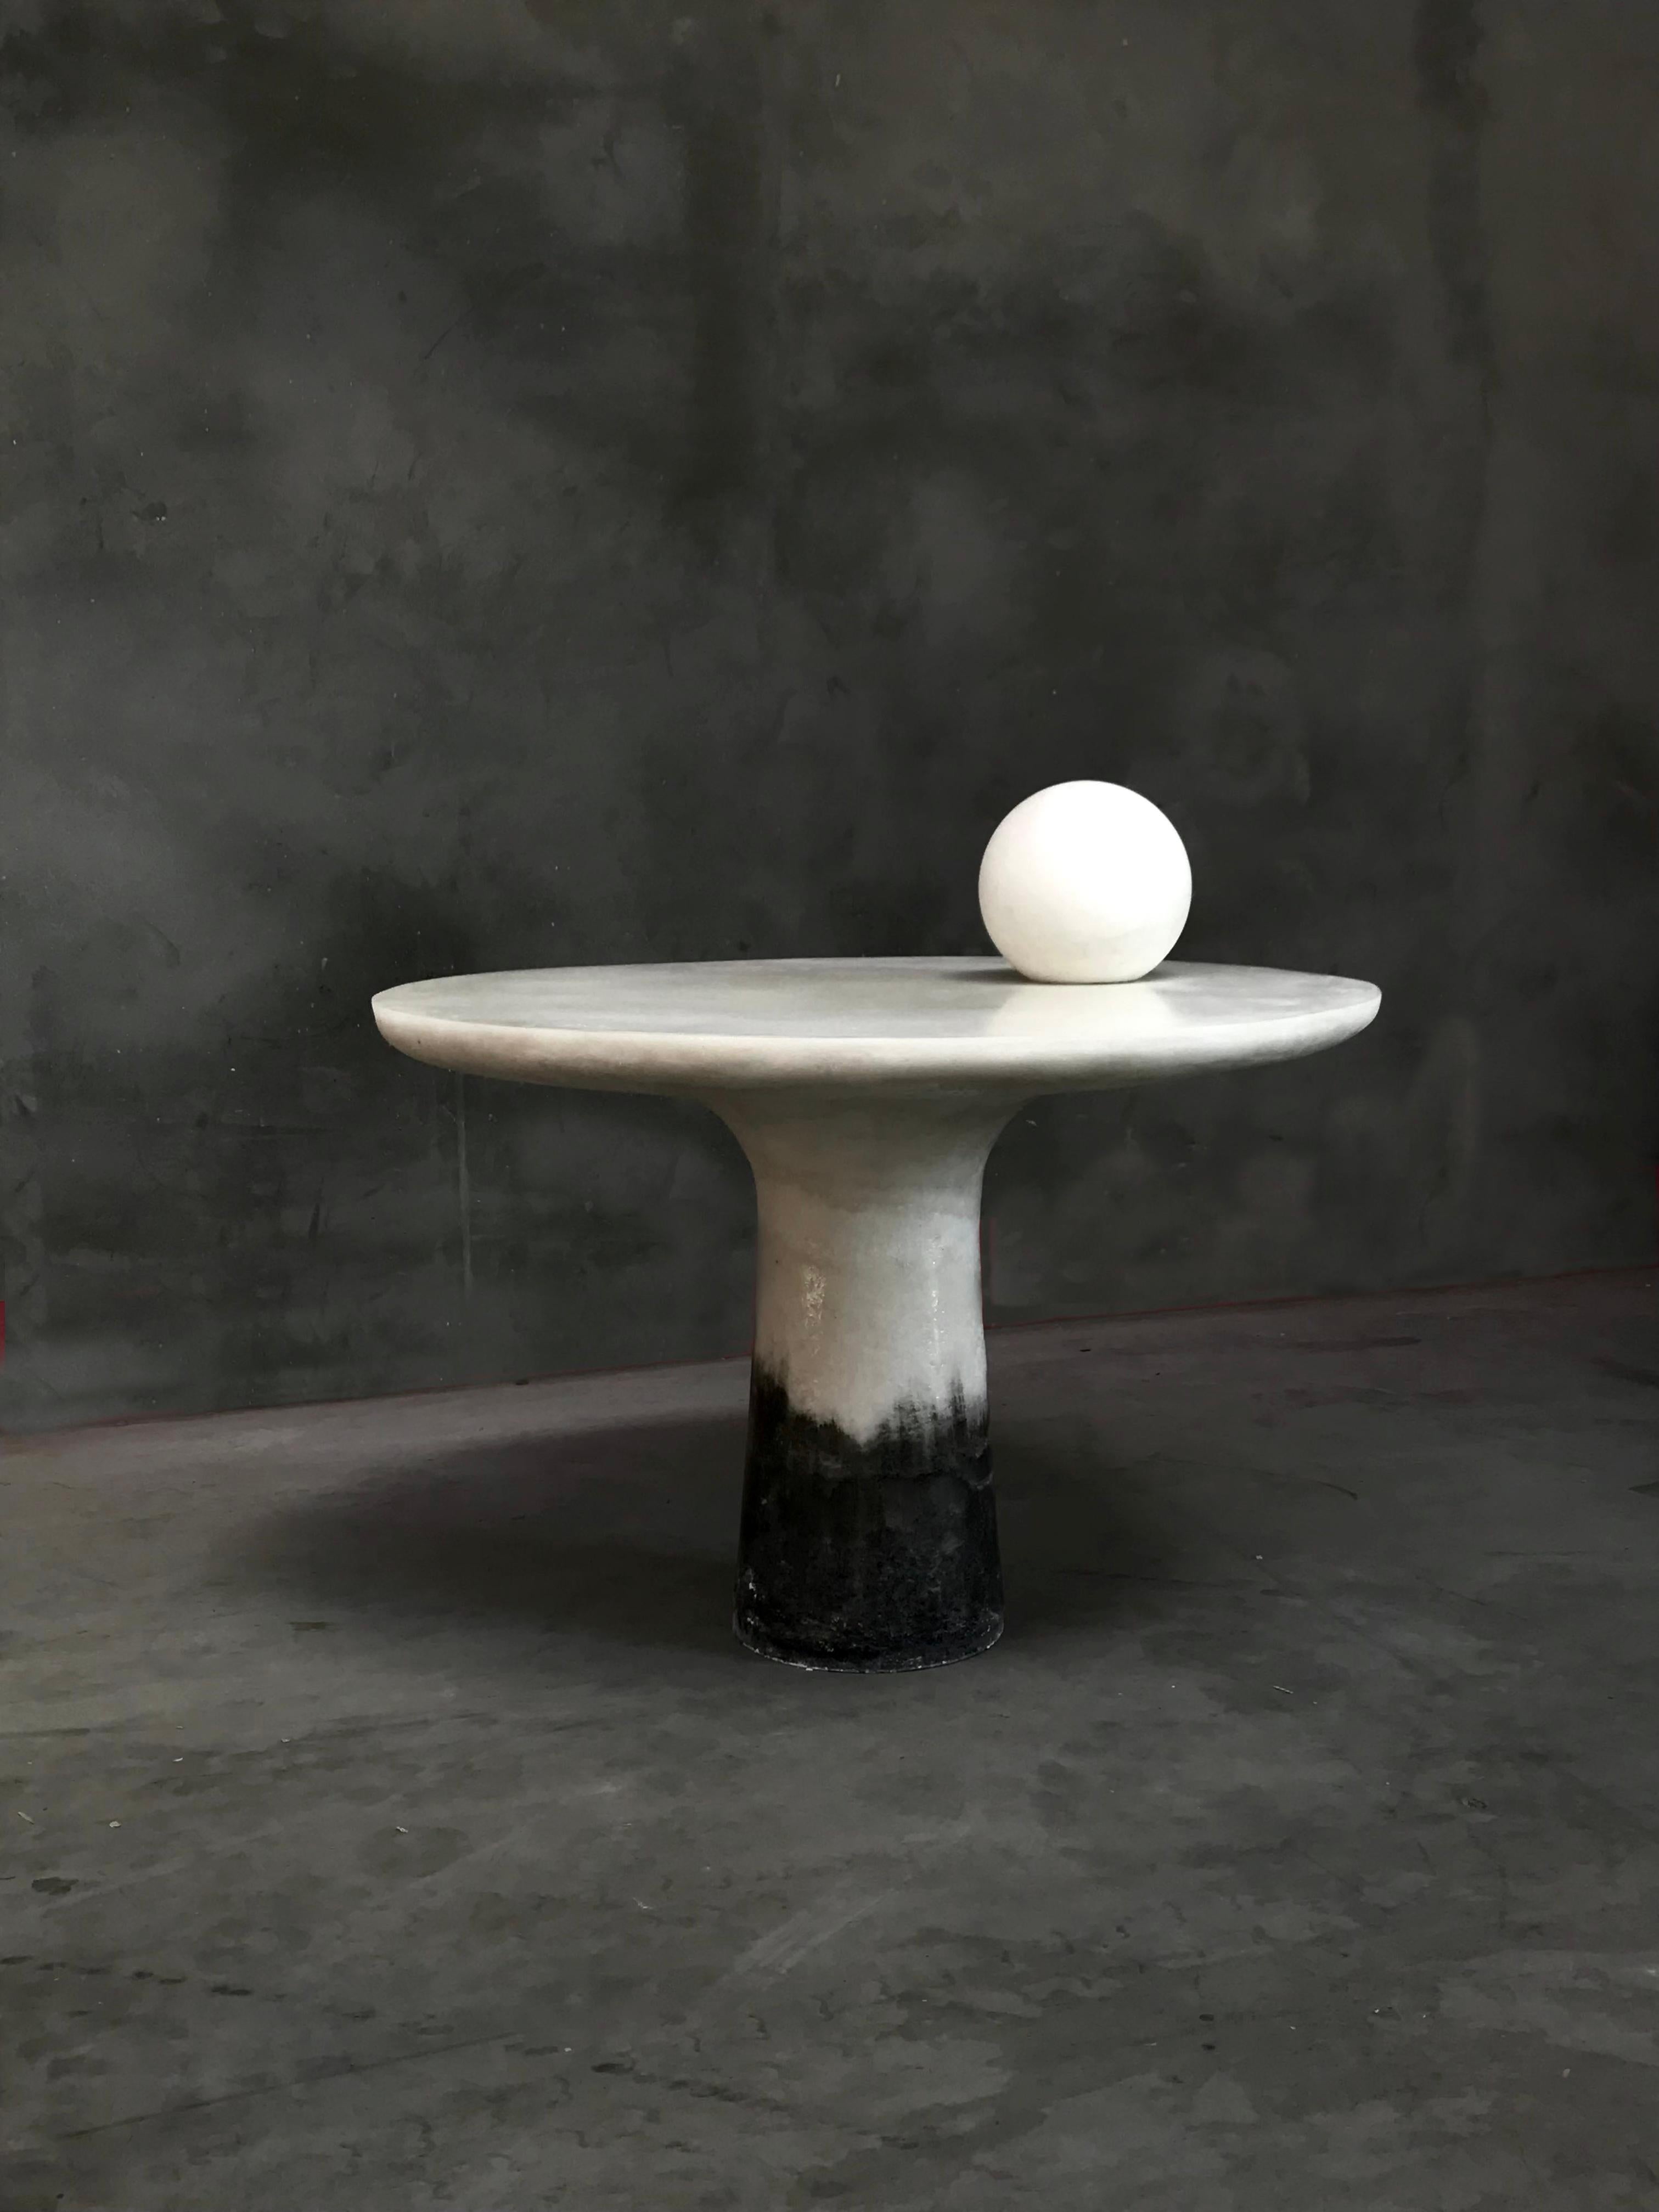 Takotsubo Dining Table by Roxane Lahidji
Dimensions: D 110 x H 75 cm.
Materials: Marble Salt.
Weight: 150 kg.

Roxane Lahidji is a social designer specializing in ecological material developments and applications. Her research focuses on achieving